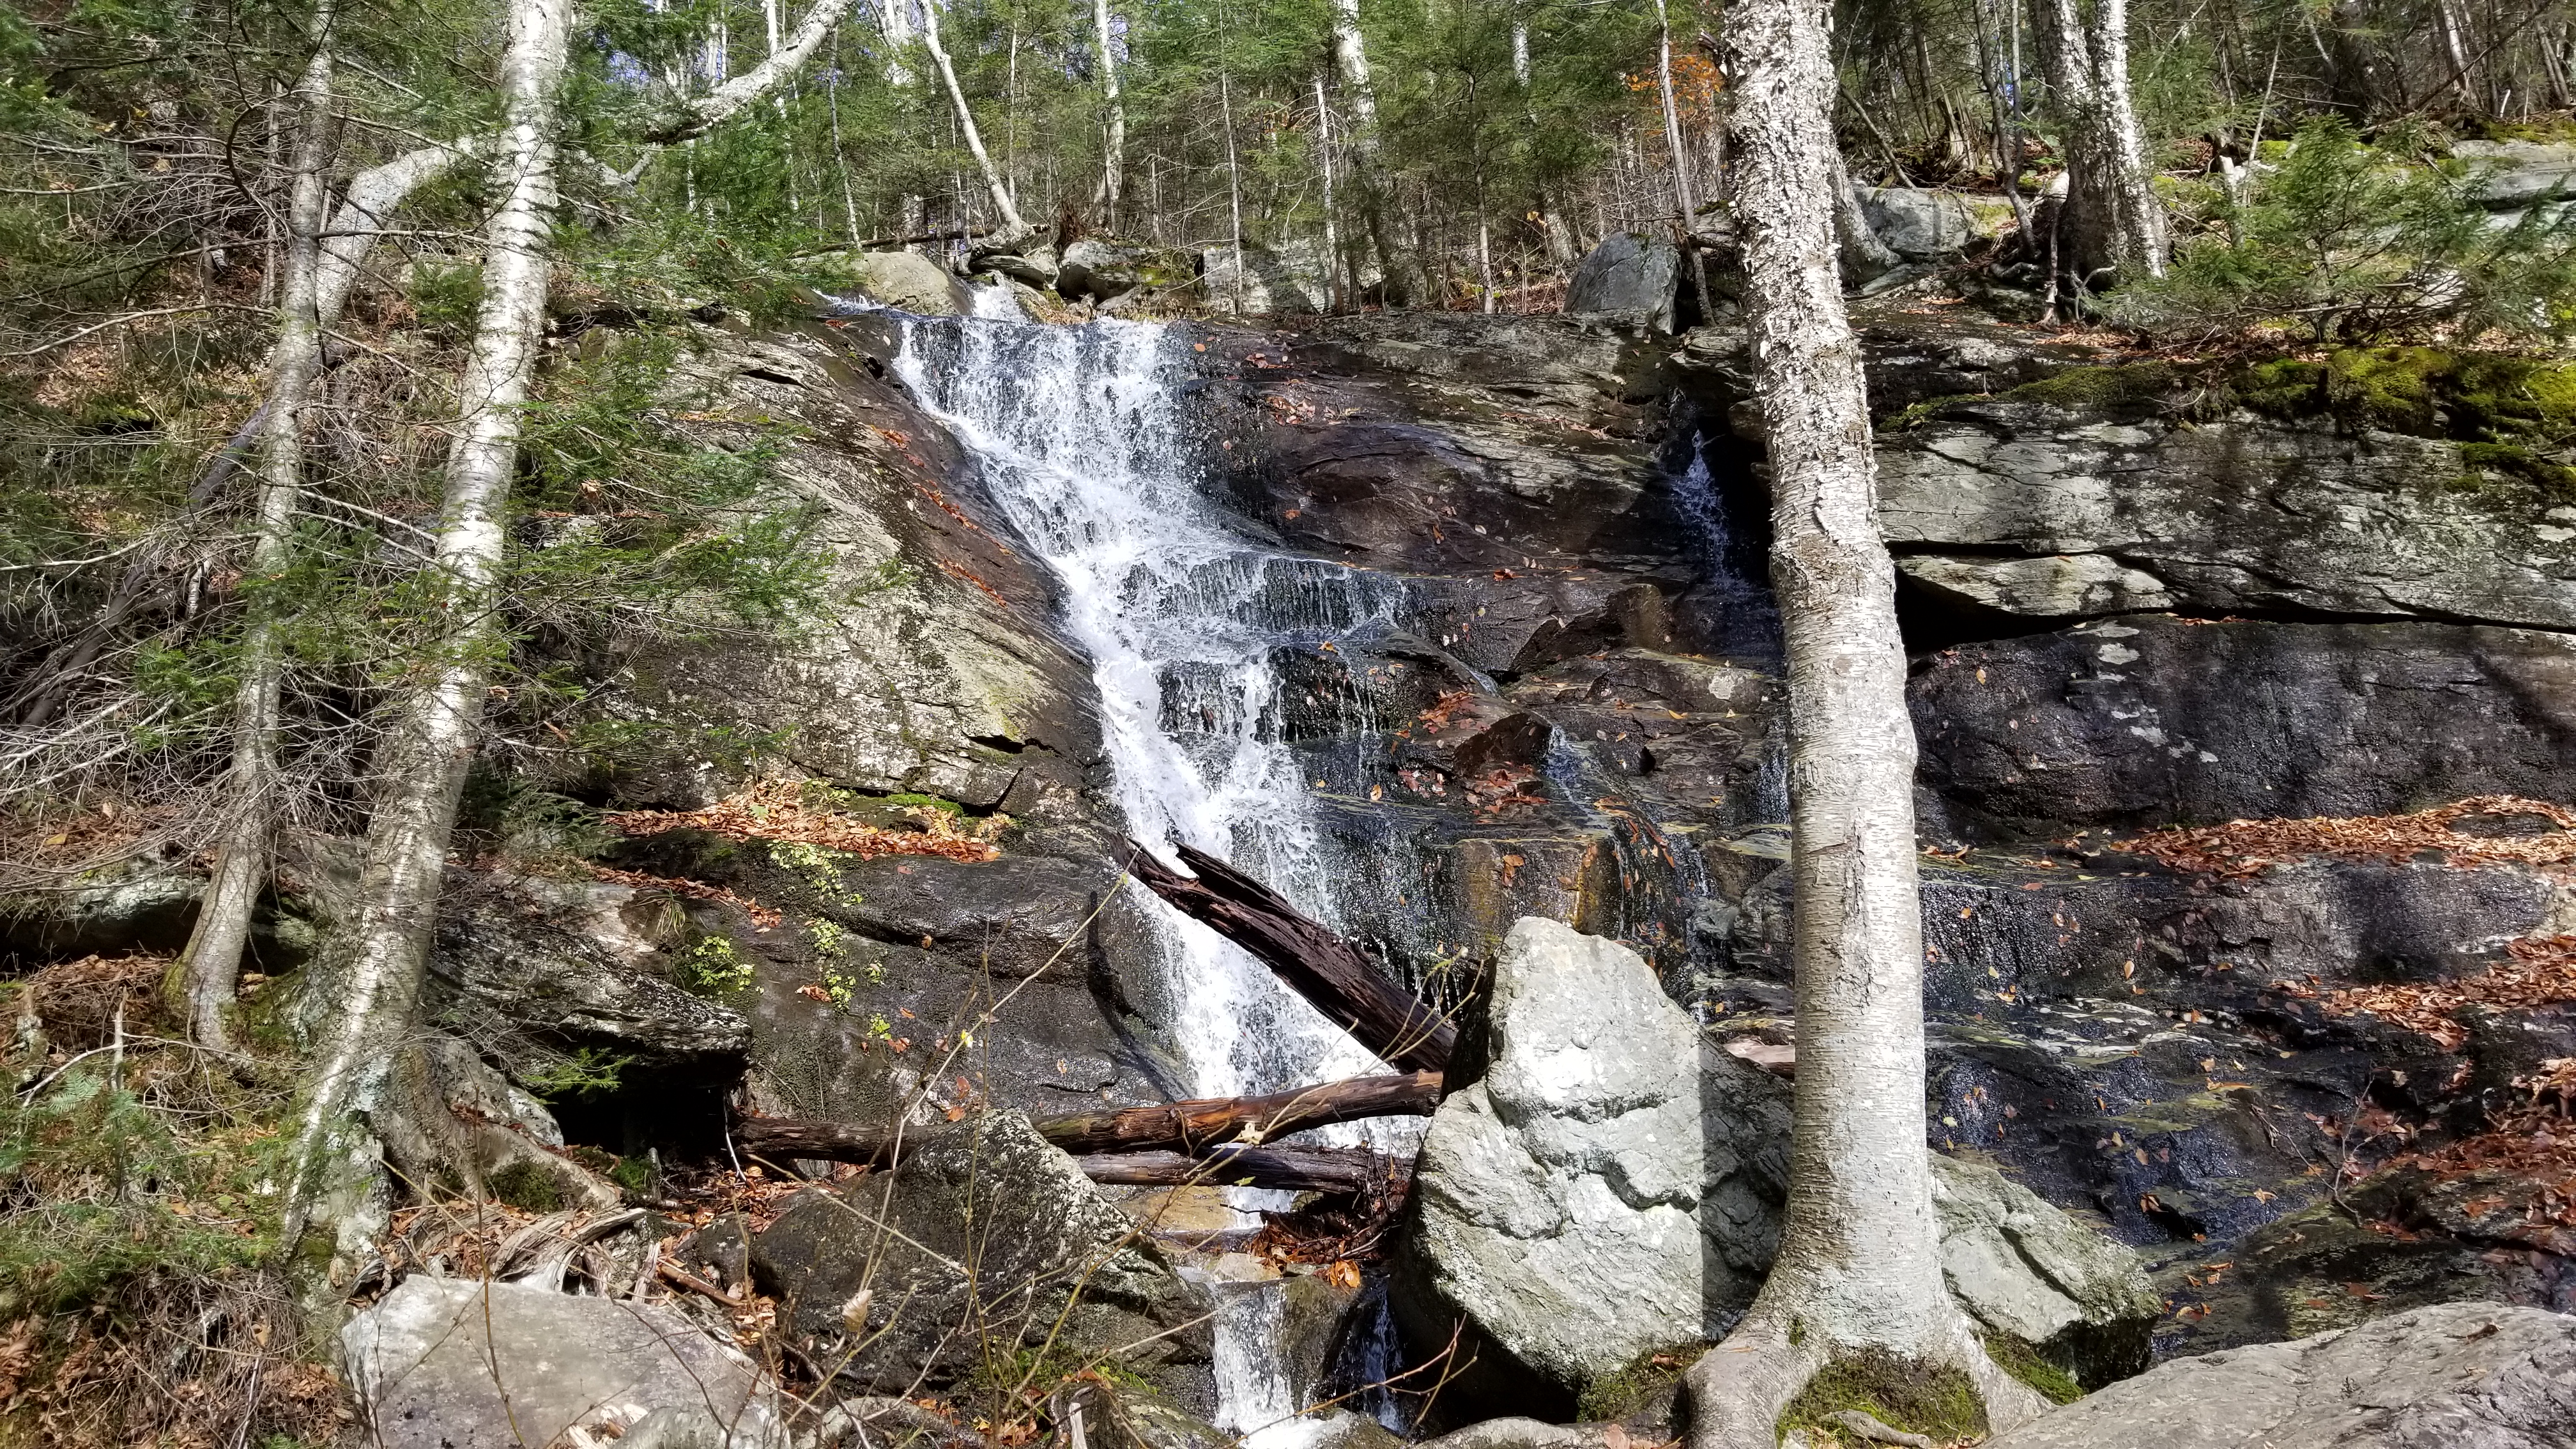 Sawyer Brook Falls on the Canty Trail